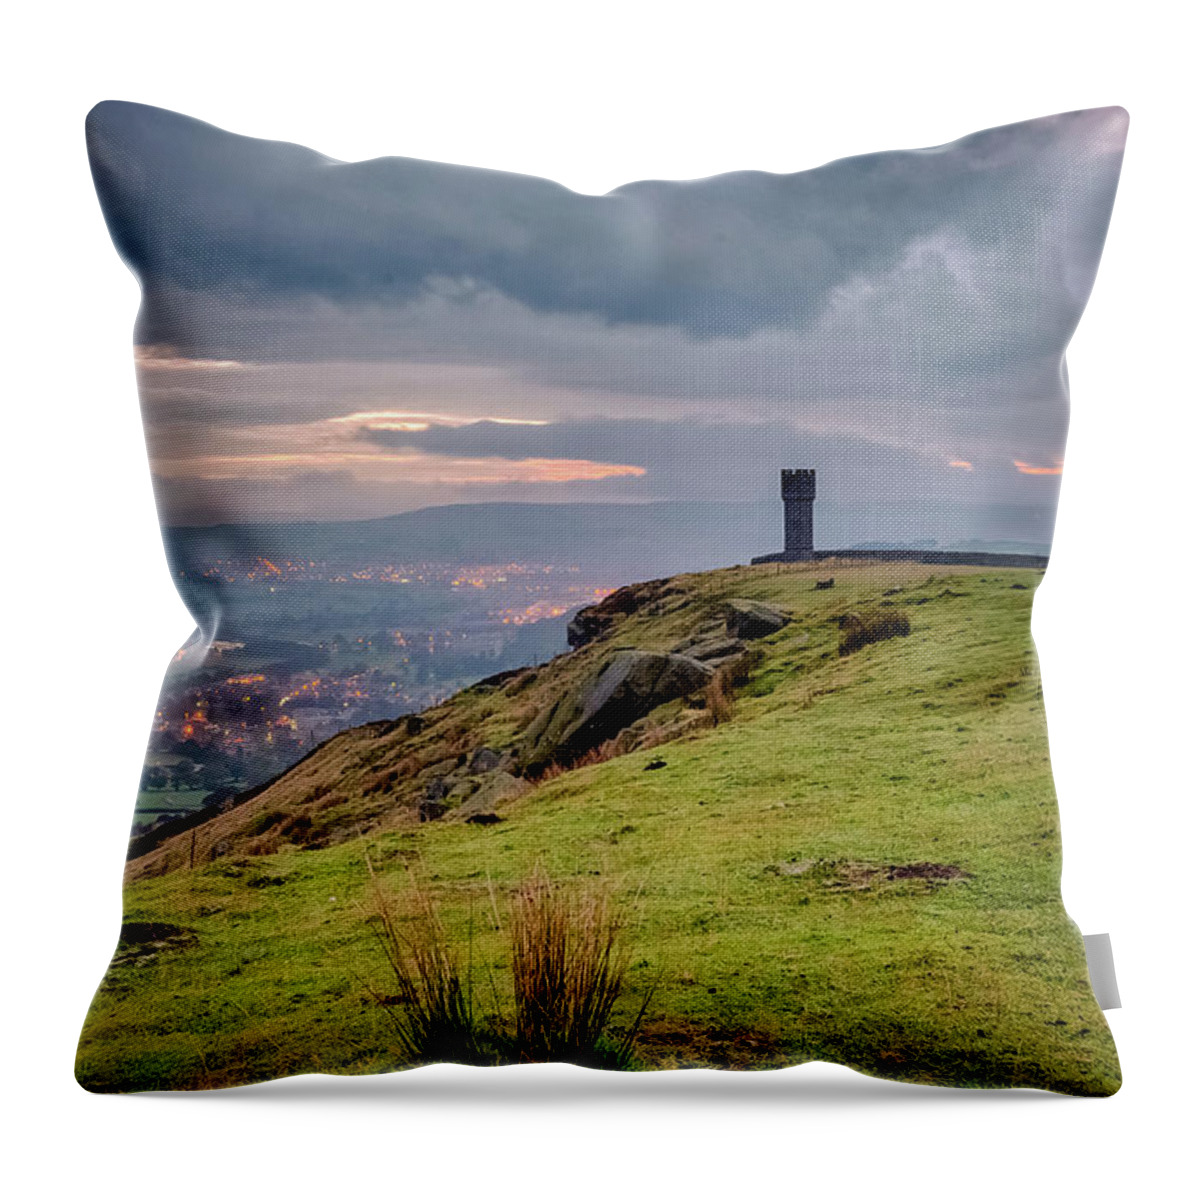 Cowling Throw Pillow featuring the photograph Lund's Tower #4 by Mariusz Talarek